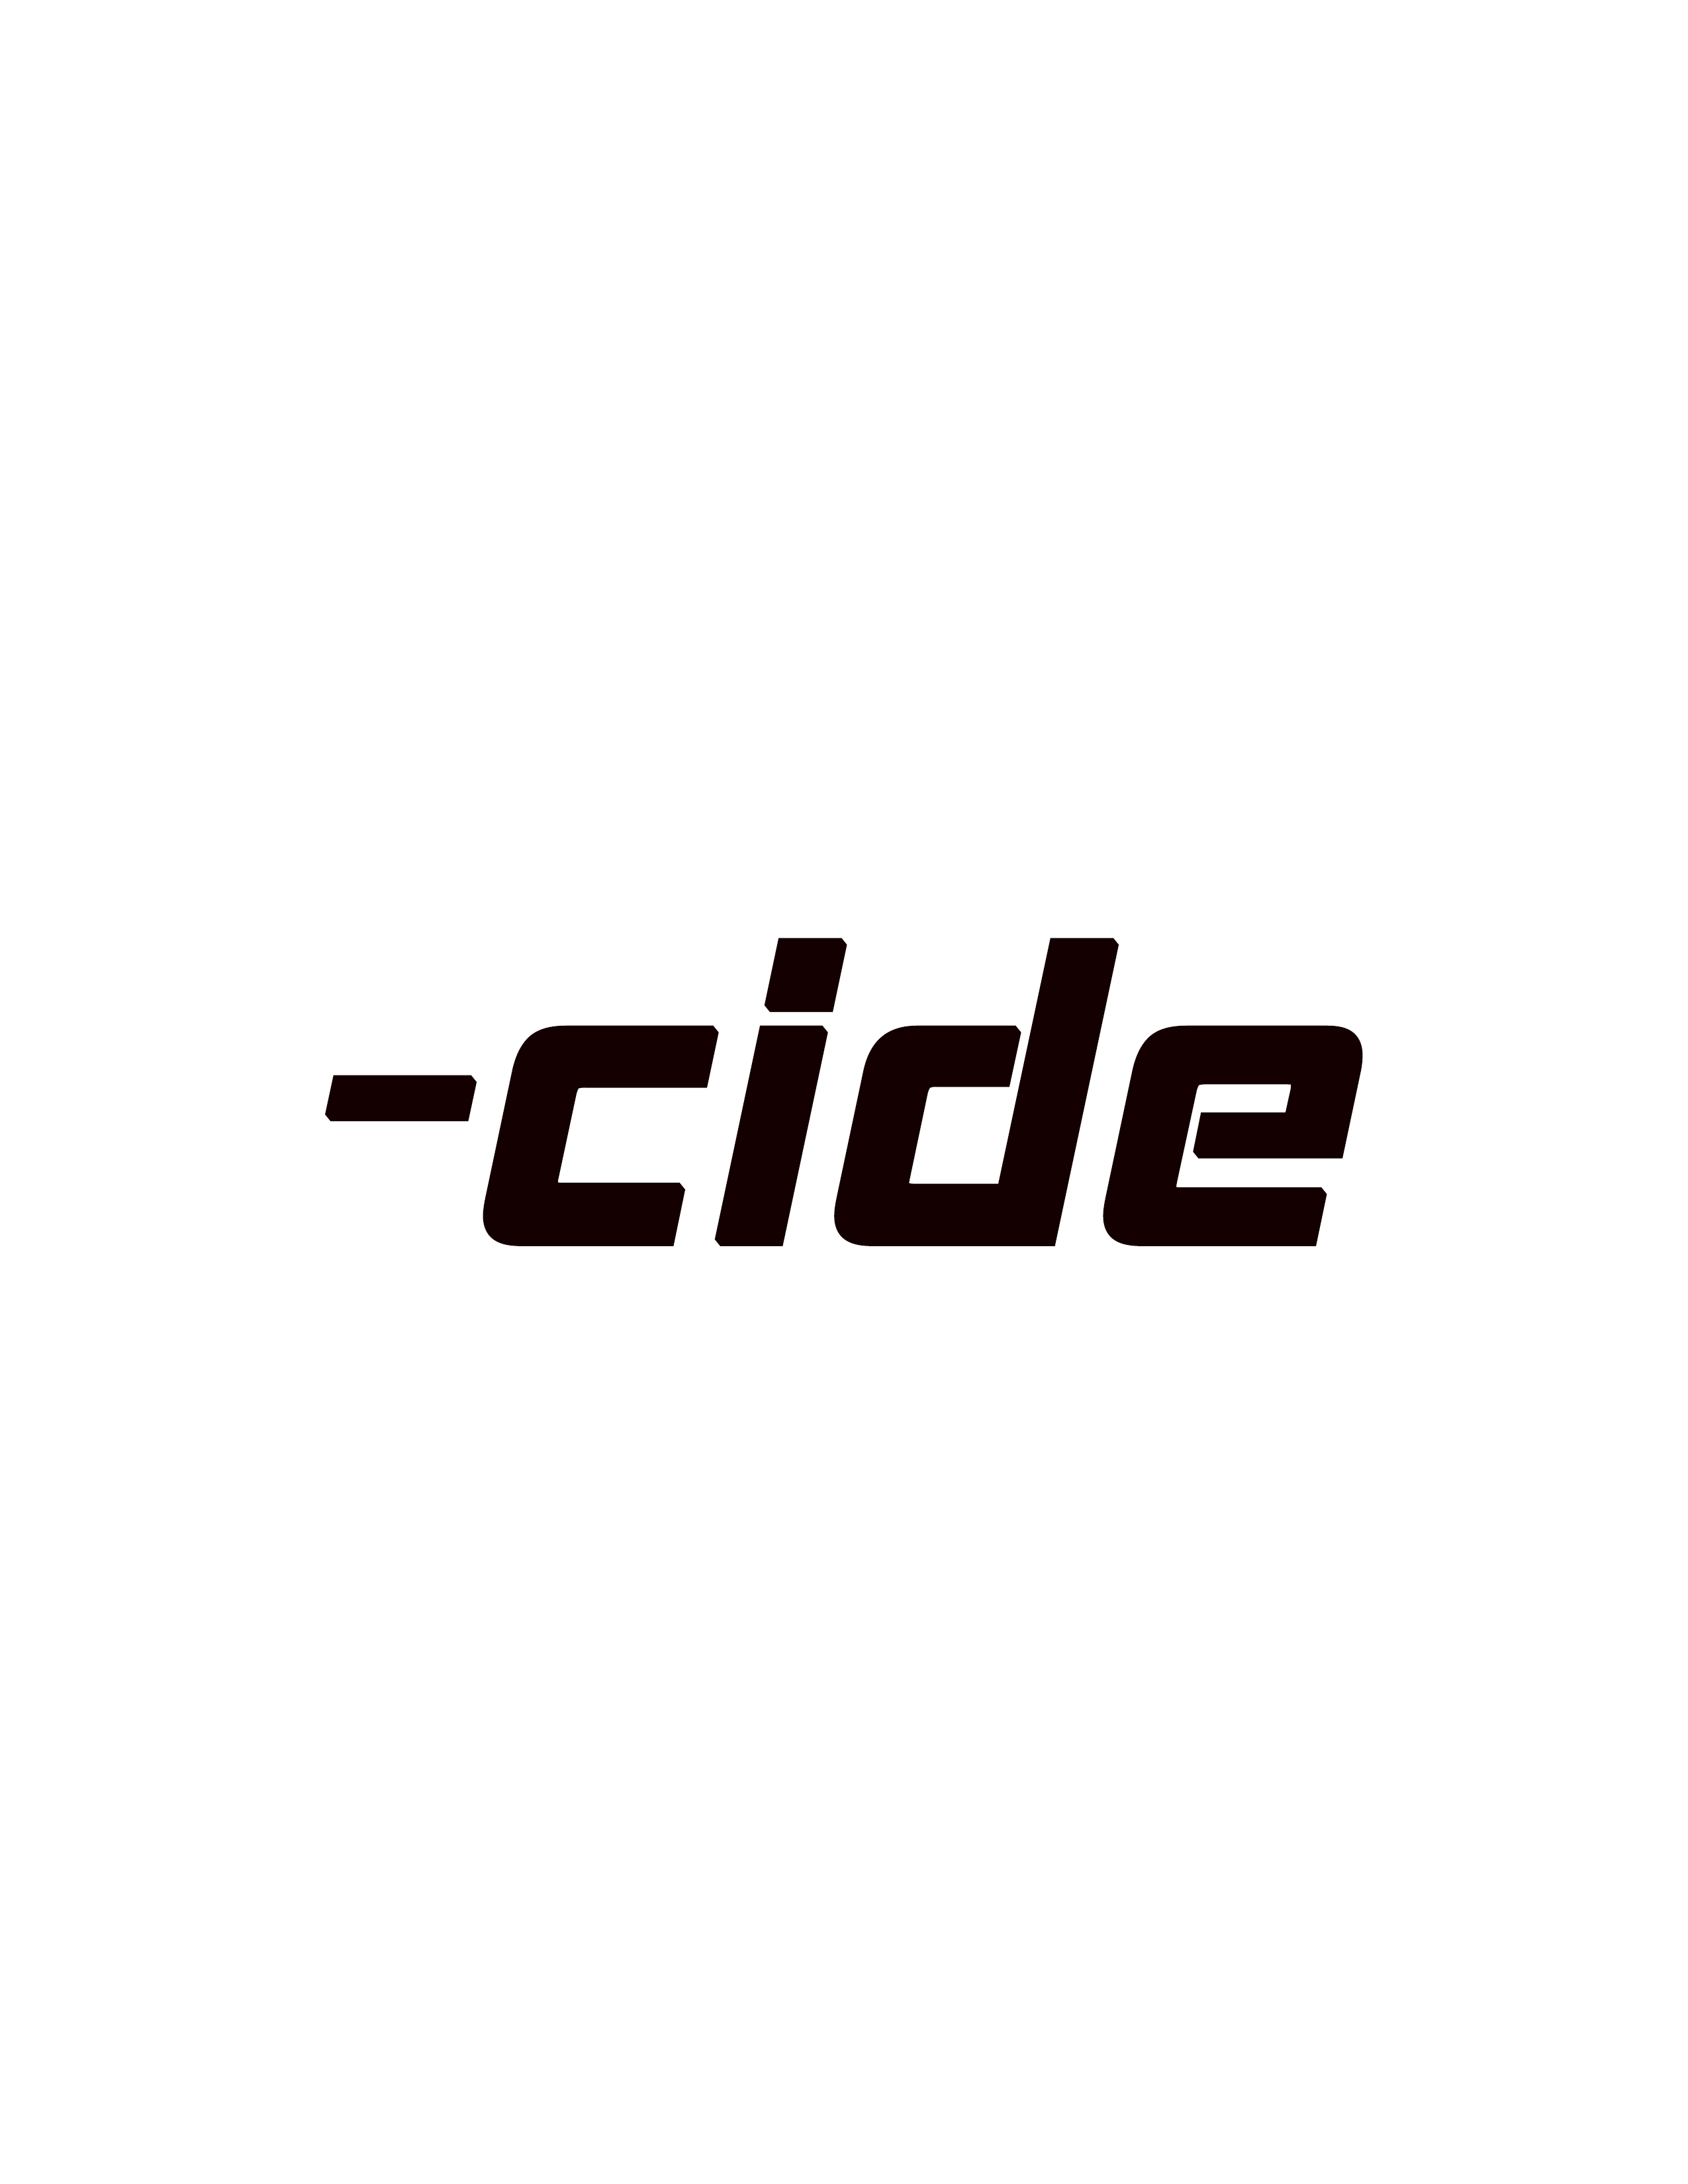 About -cide